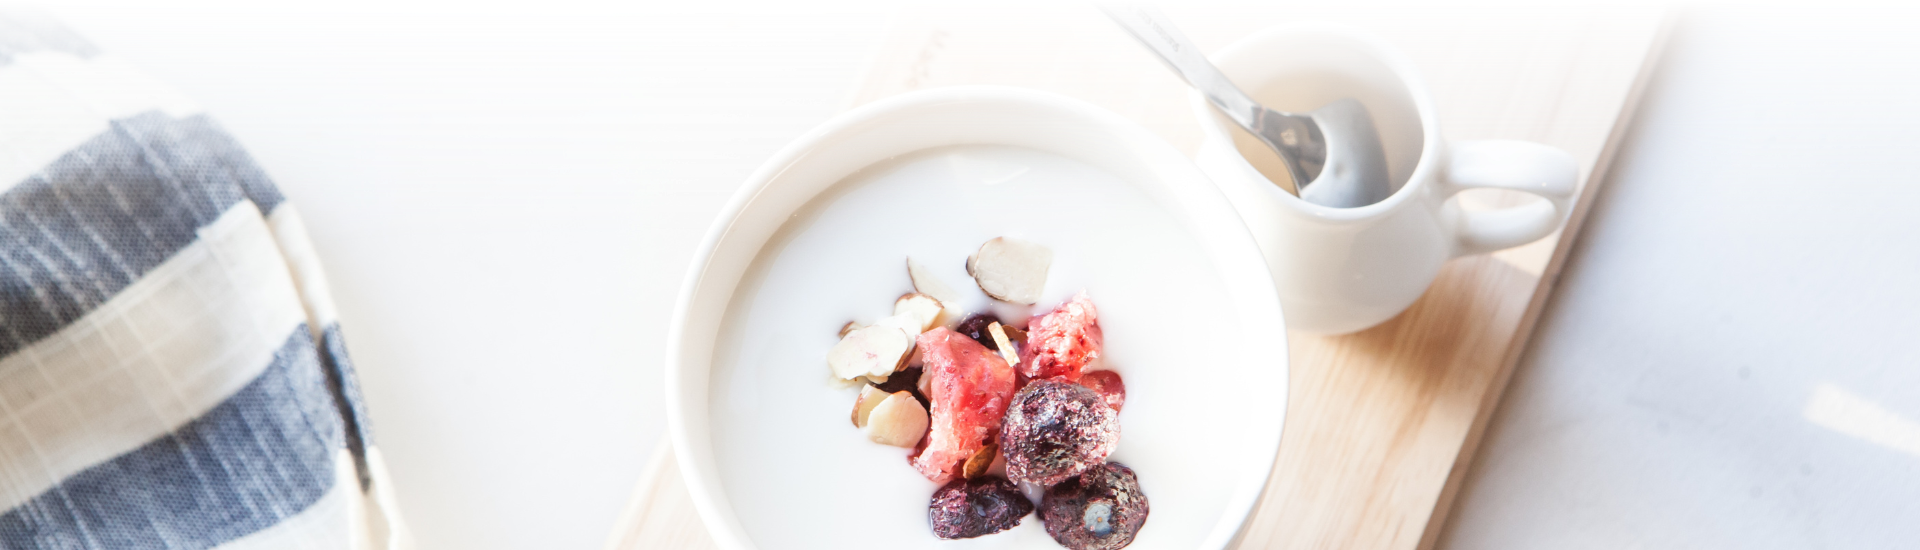 Berries placed in yogurt set on a wooden setting